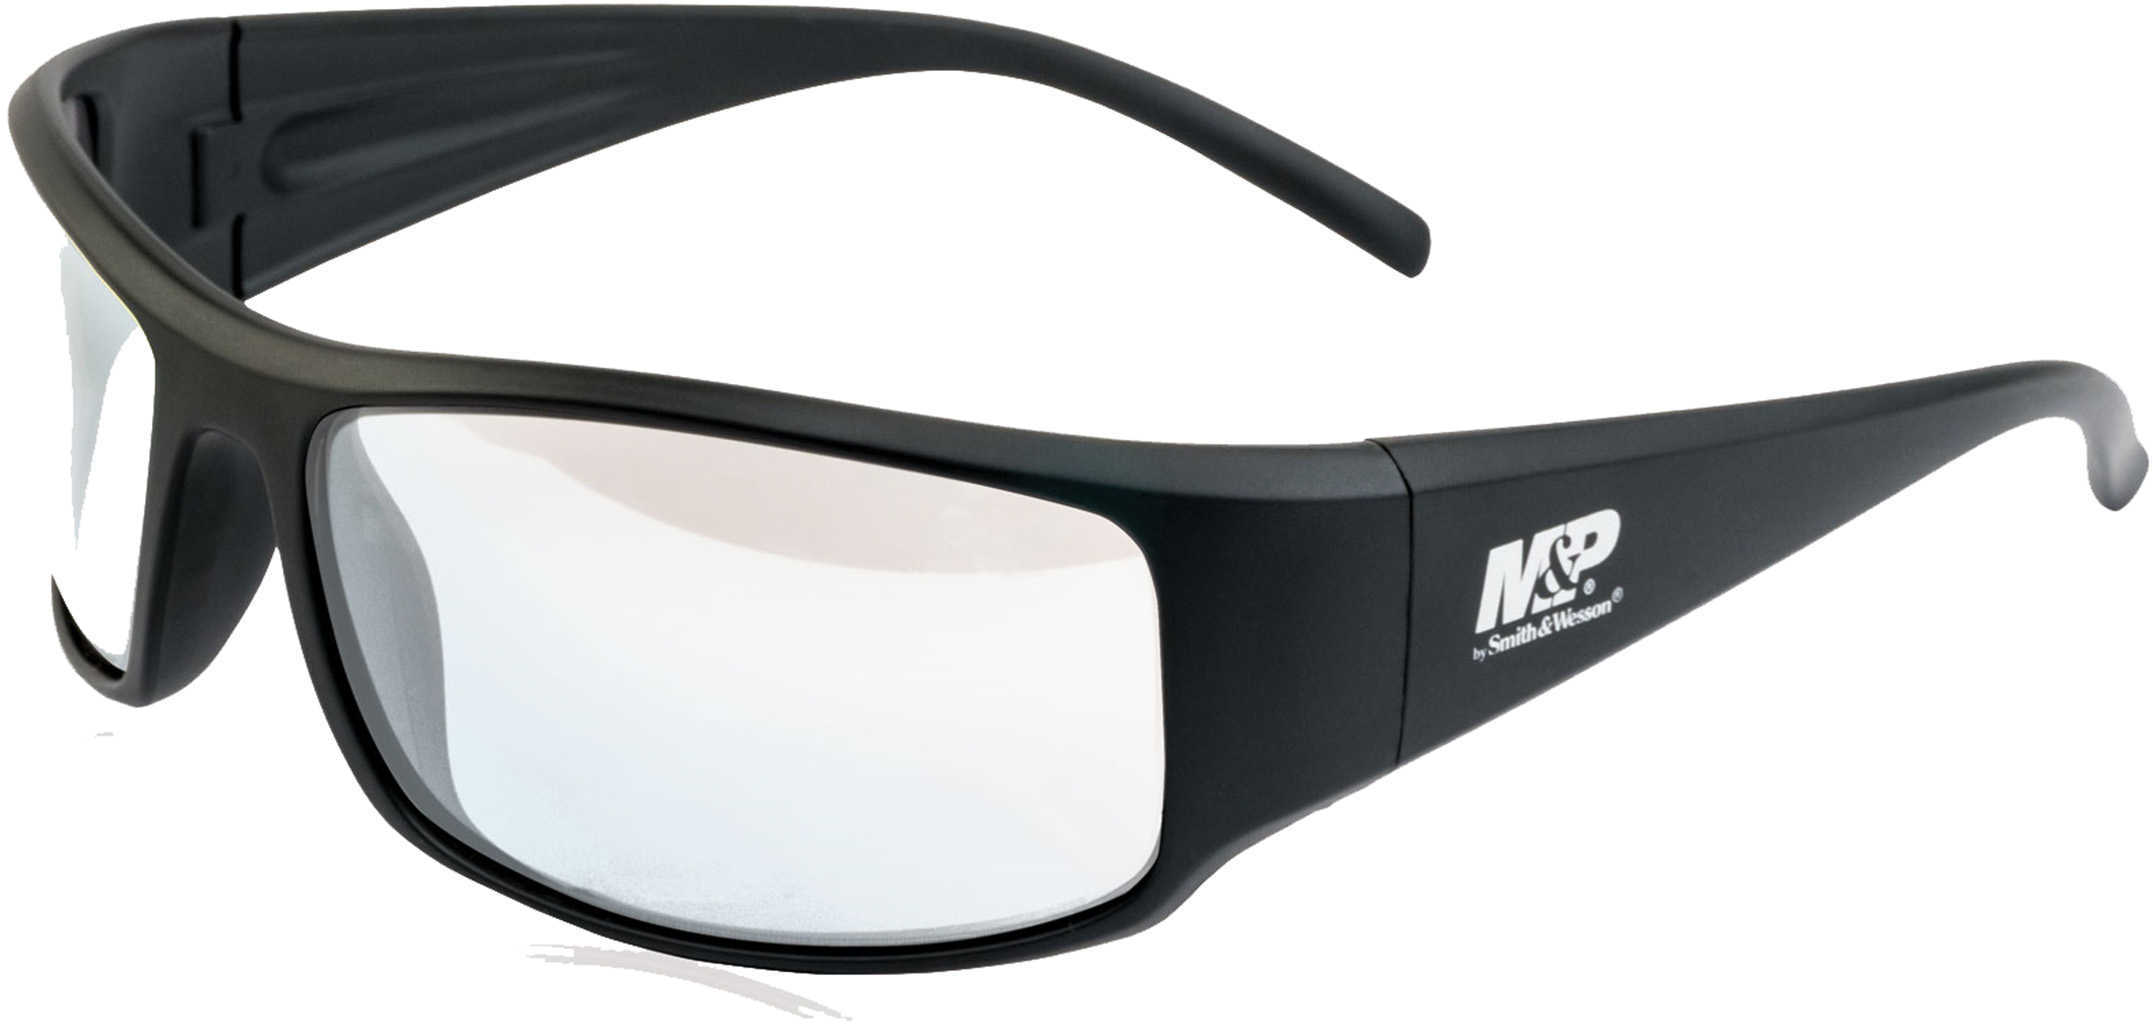 Smith & Wesson M&P Thunderbolt Shooting Glasses Black Frame, Clear Mirror Lens Md: 110168